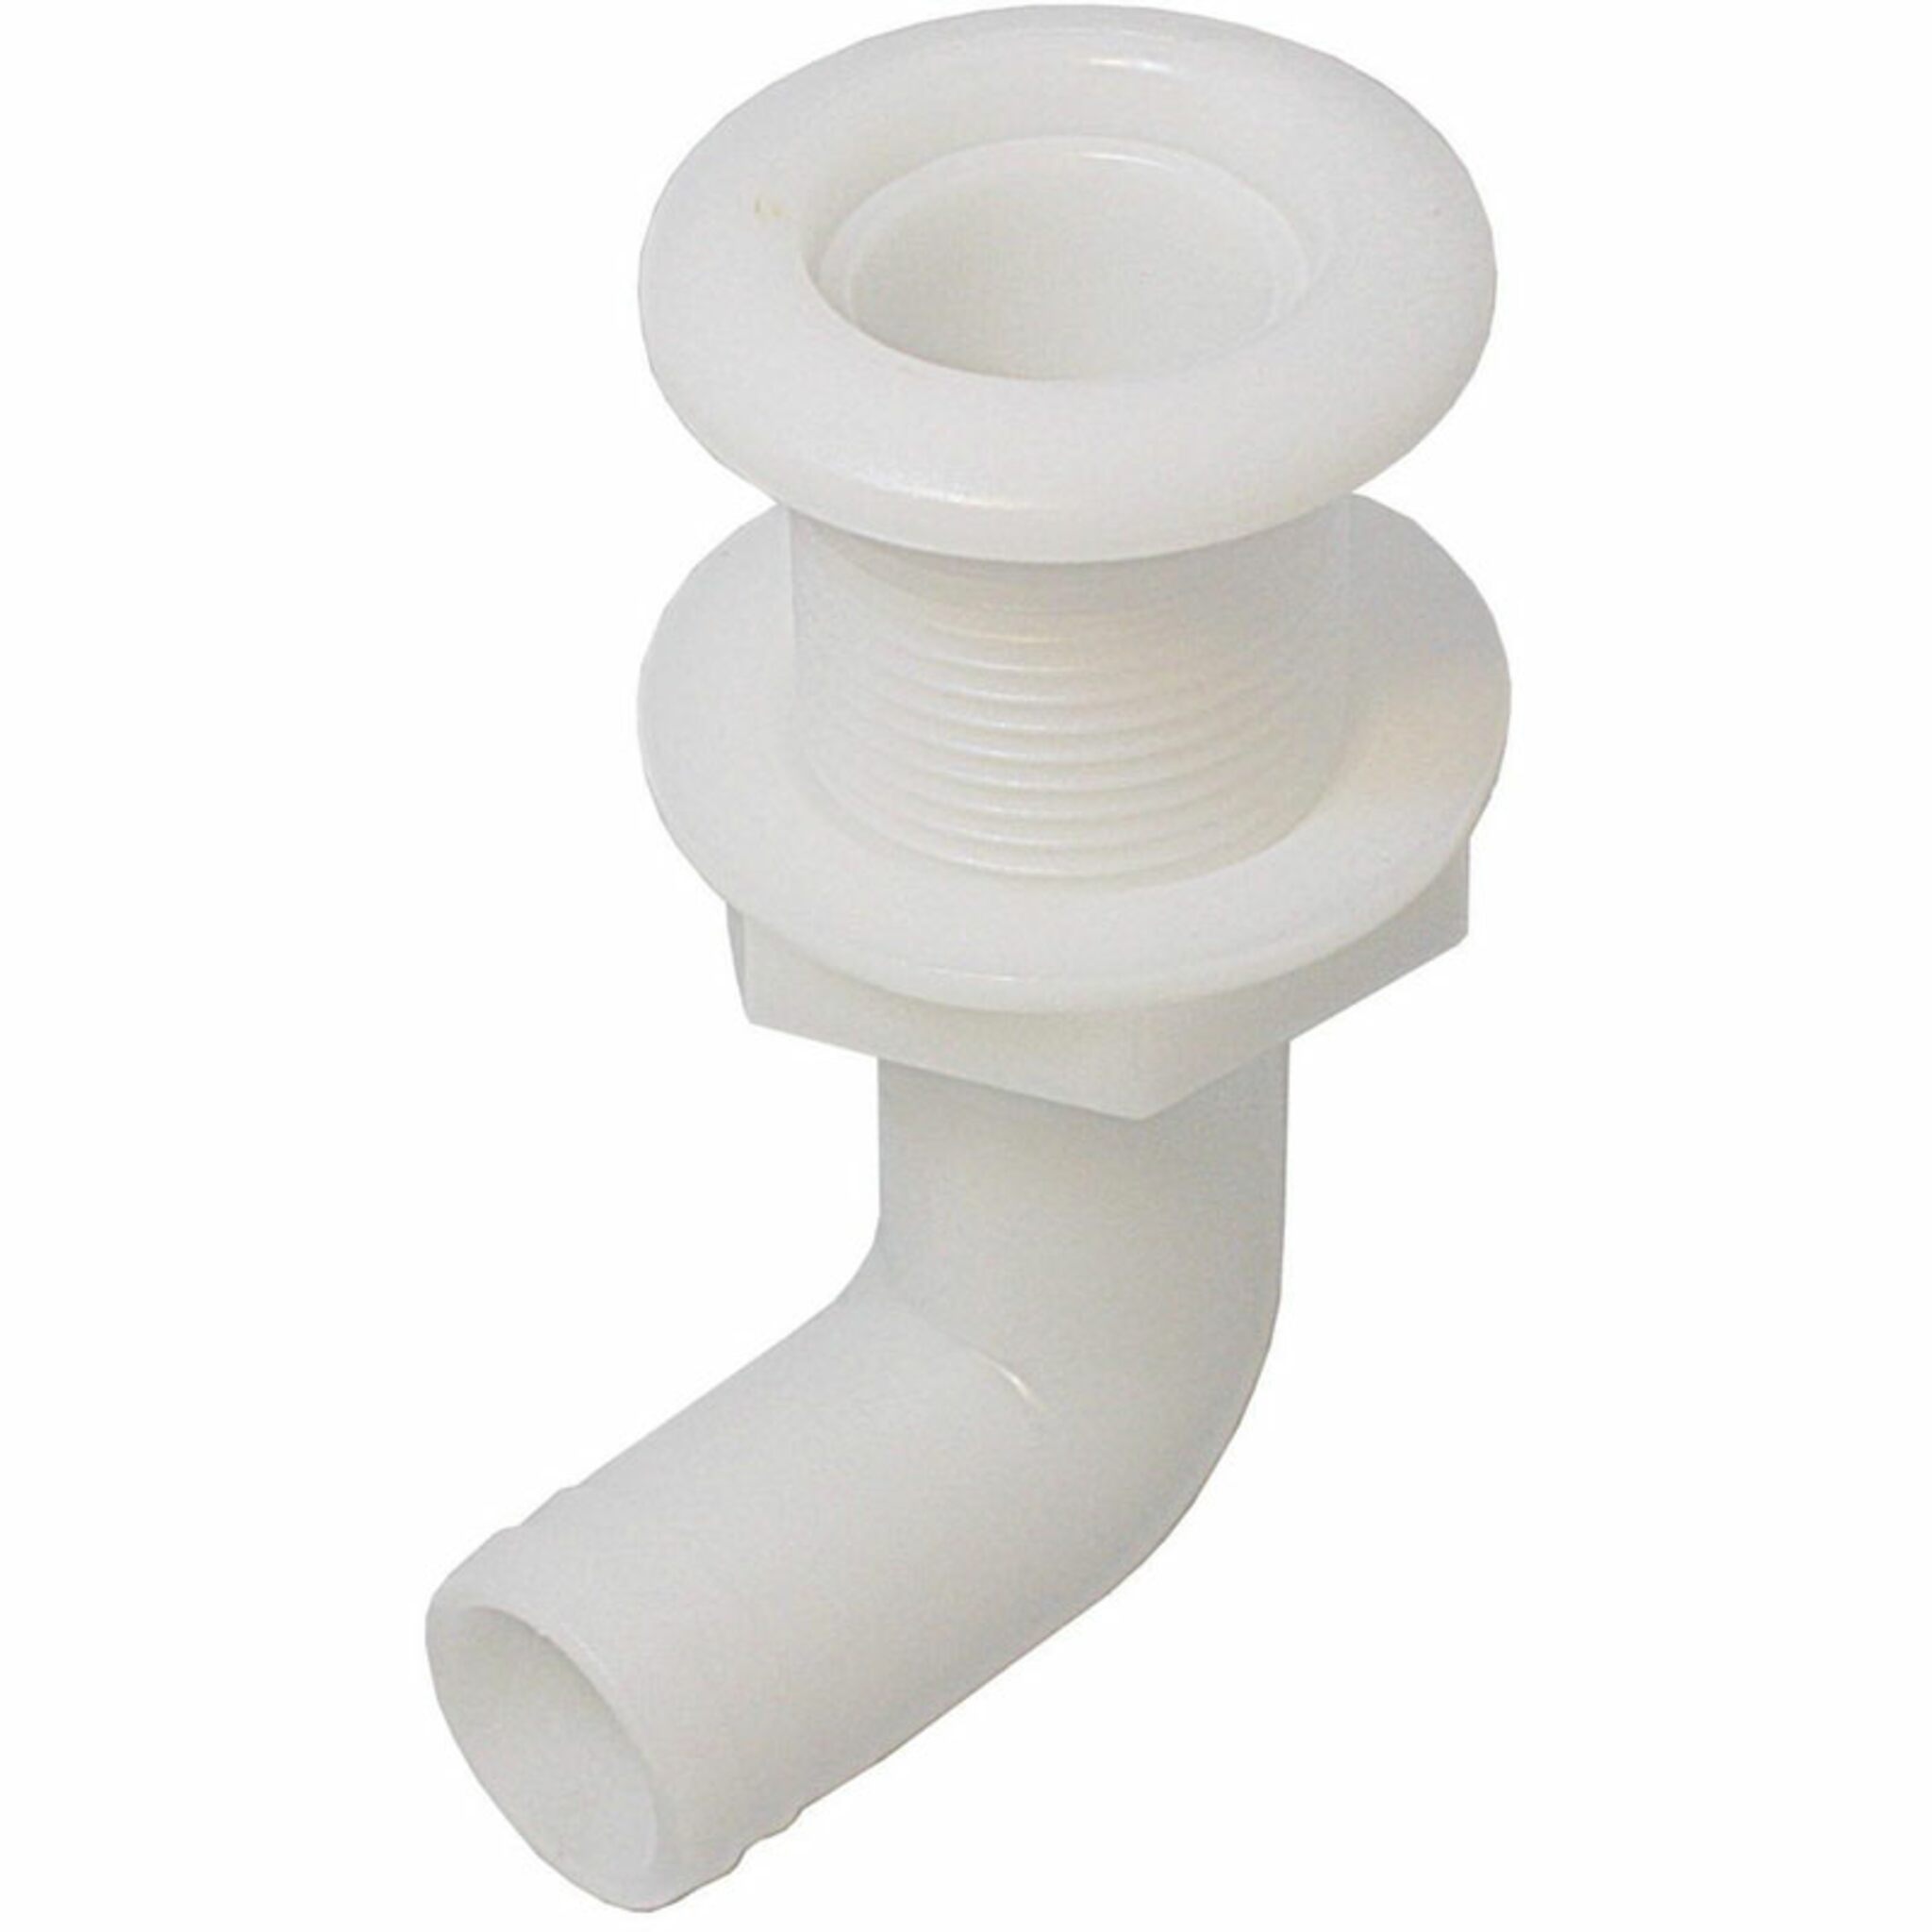 Flanged diffuser with 90° hose nozzle